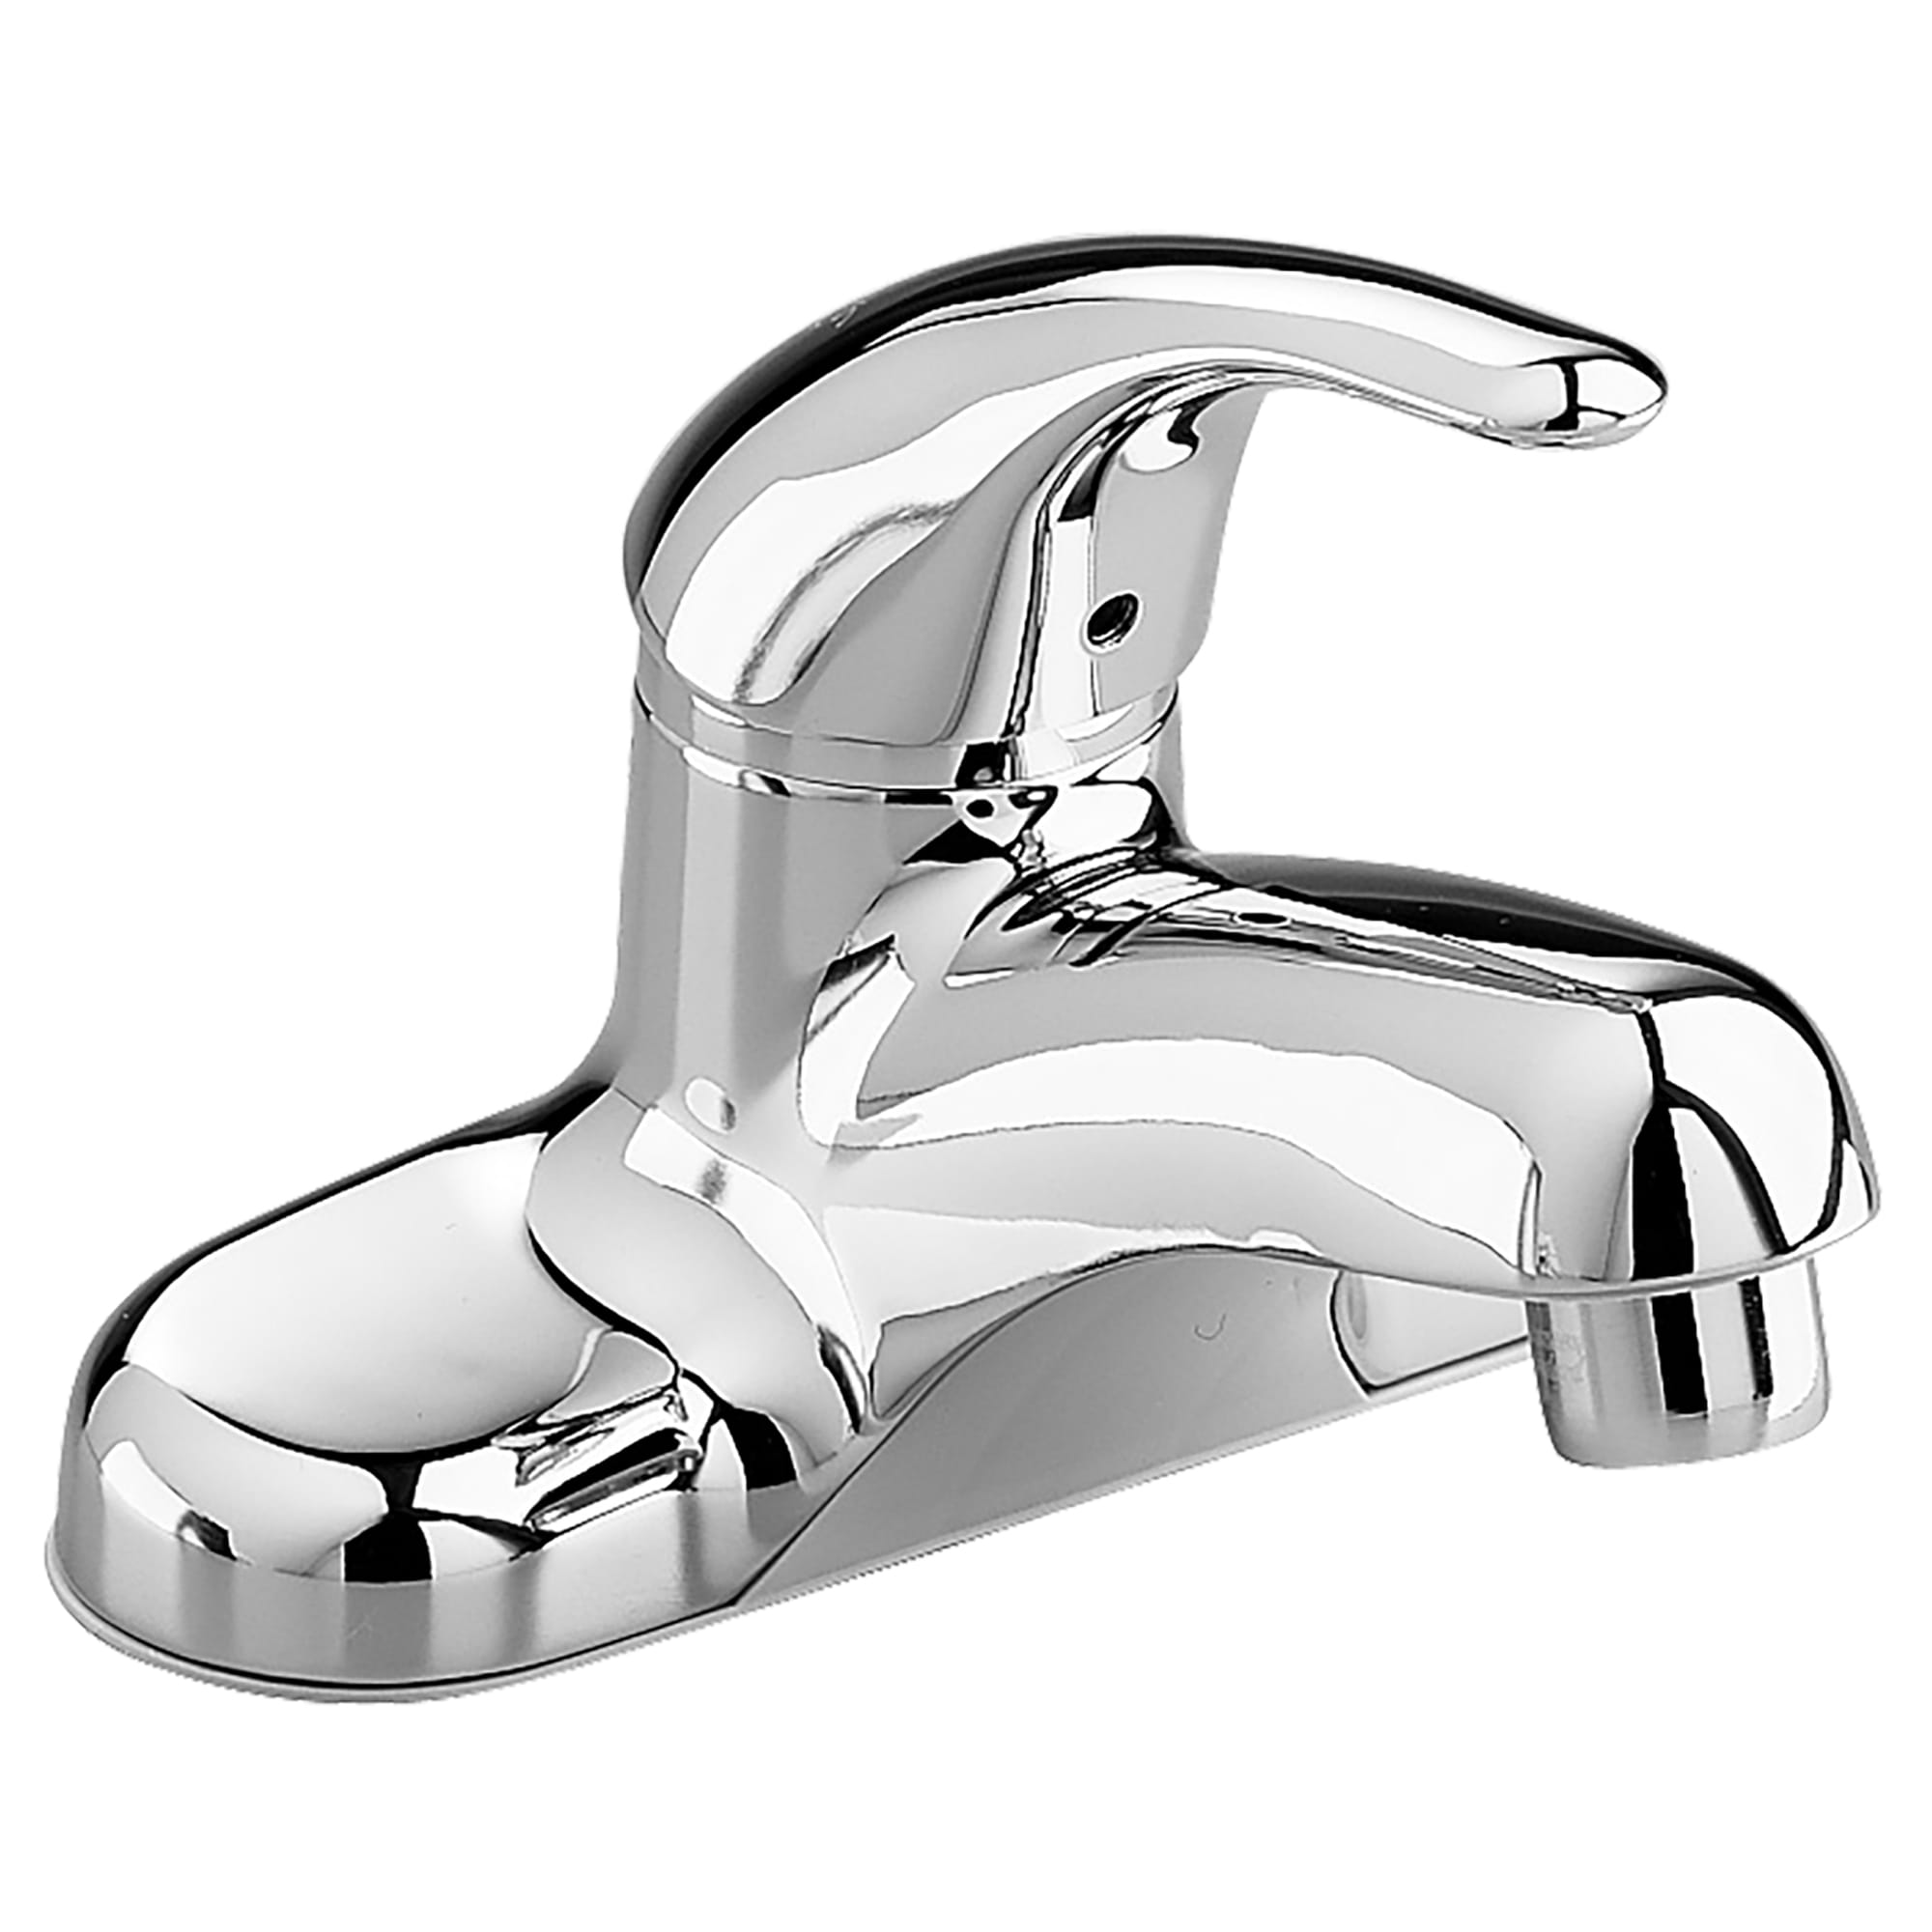 Colony Soft 4 Inch Centerset Single Handle Bathroom Faucet 12 gpm 45 L min With Lever Handle CHROME